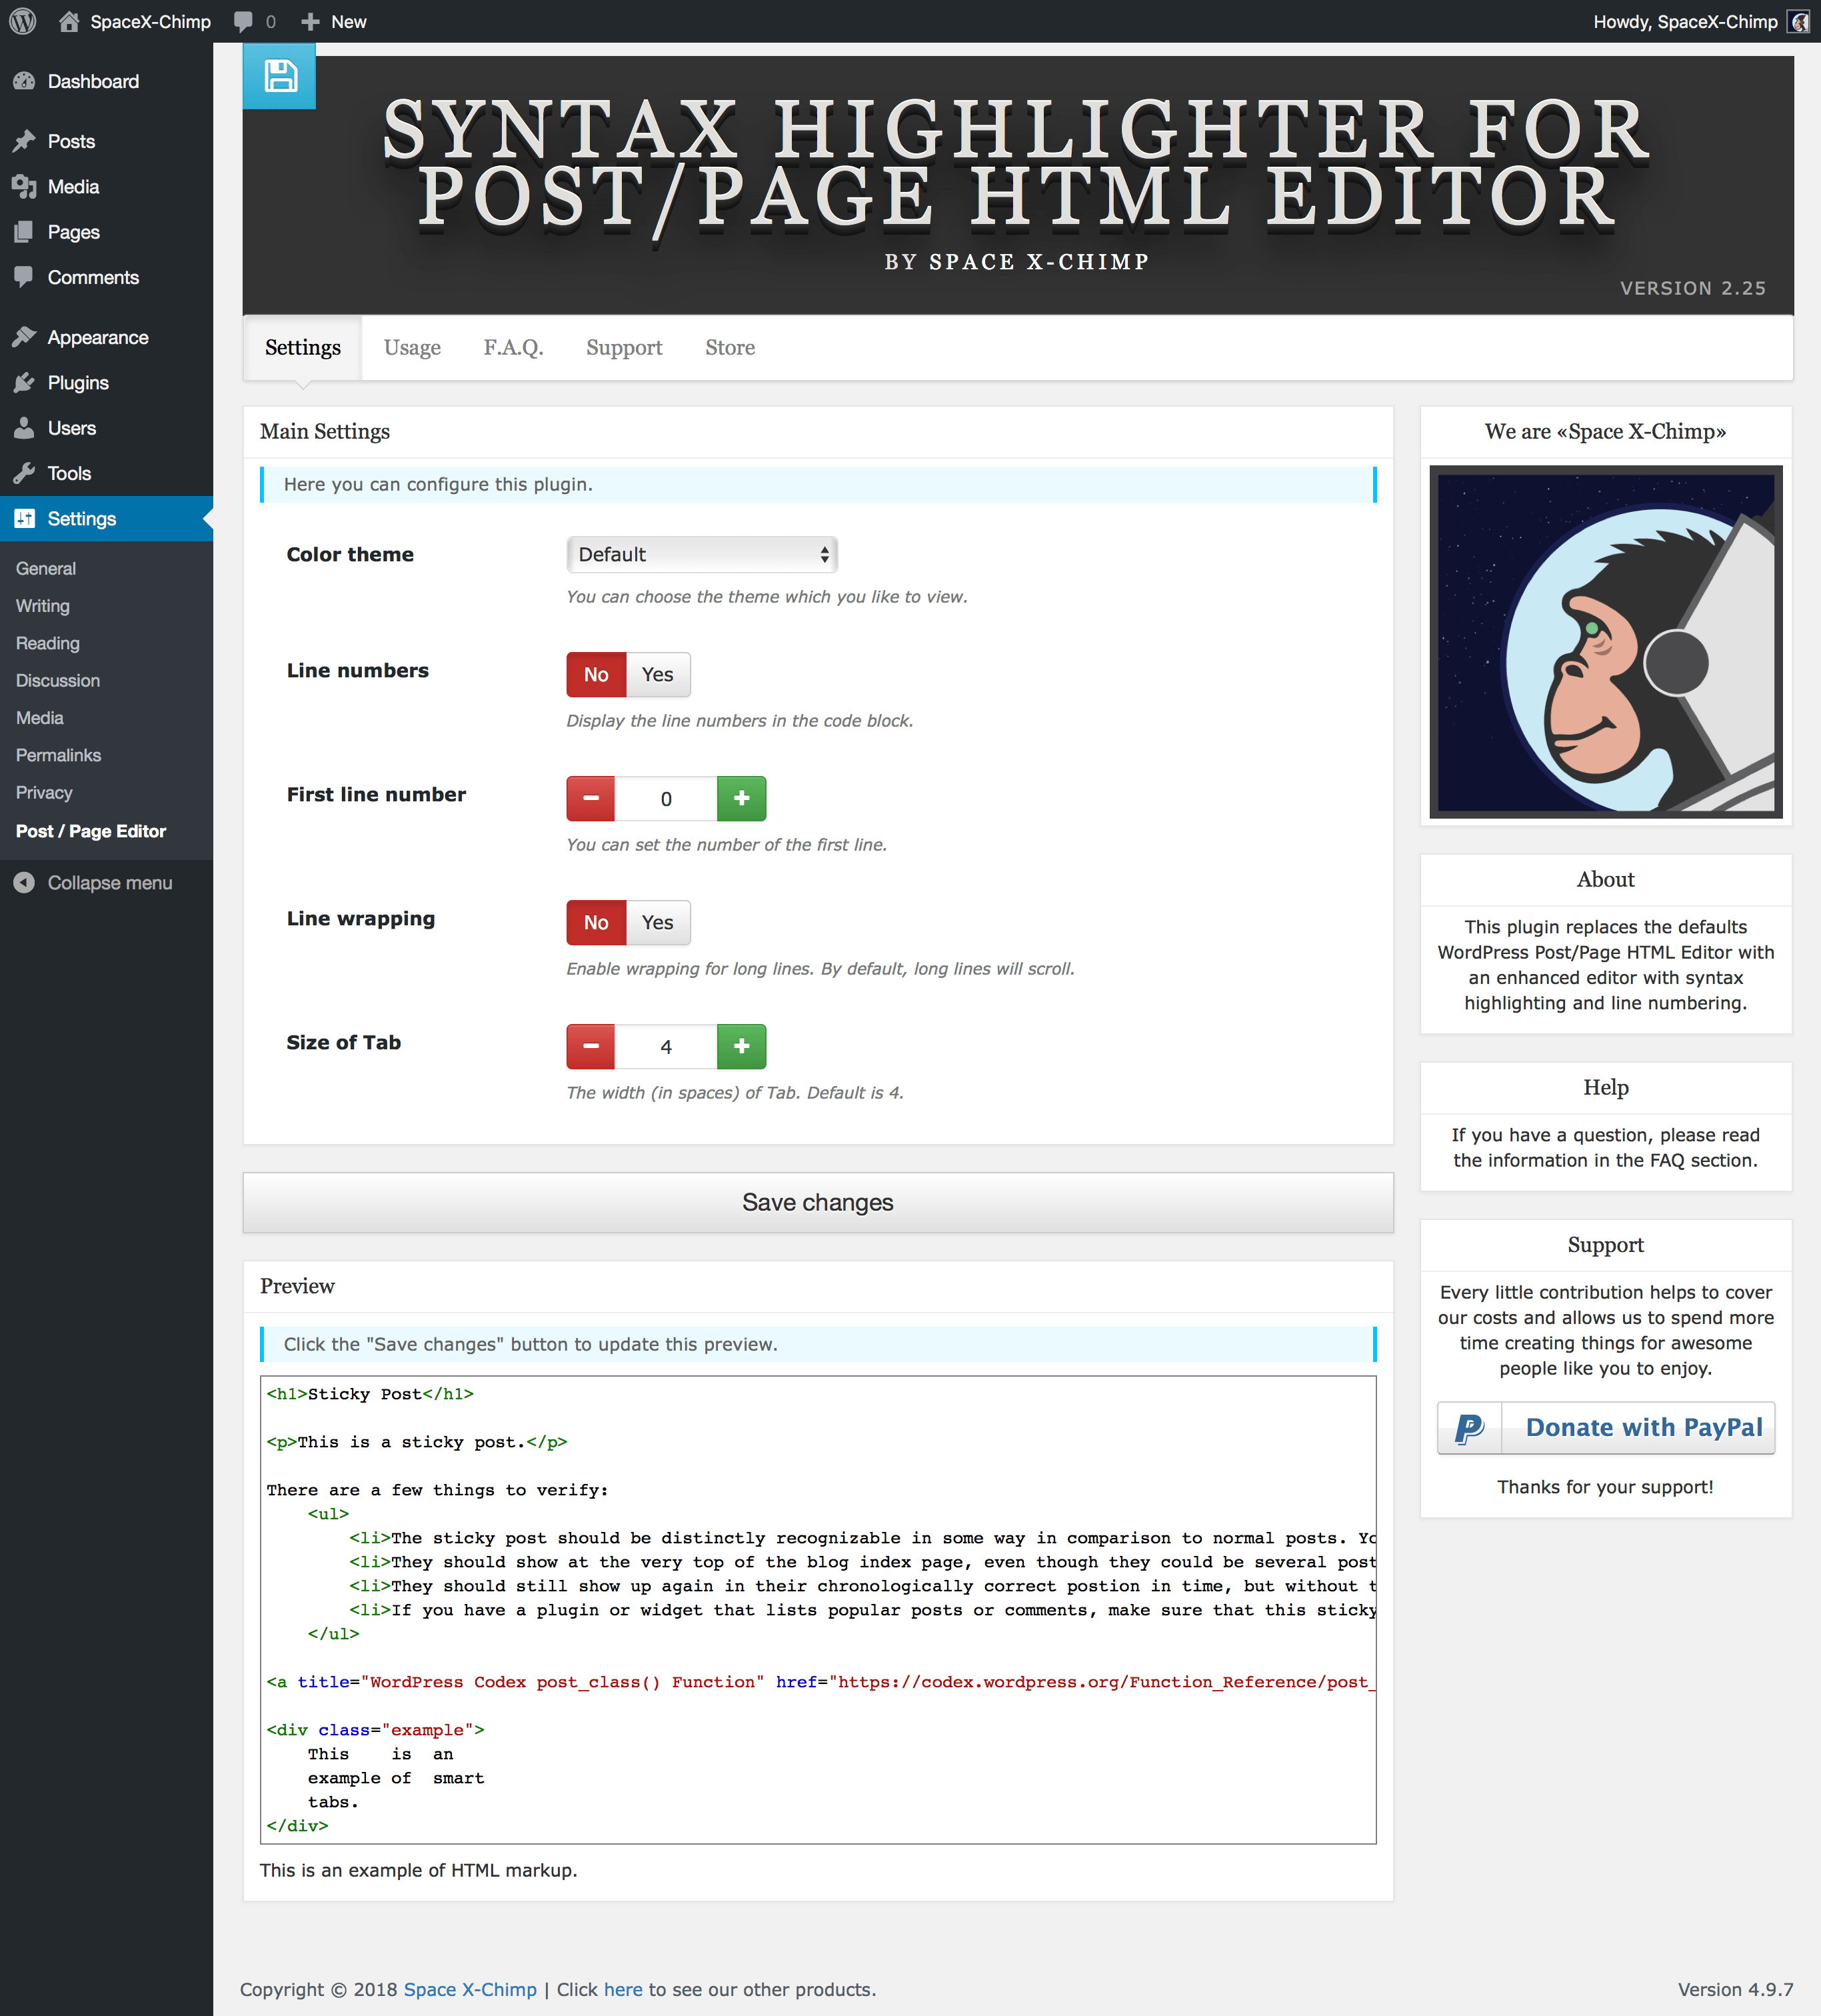 WP plugin "Syntax Highlighter for Post/Page HTML Editor" by Space X-Chimp